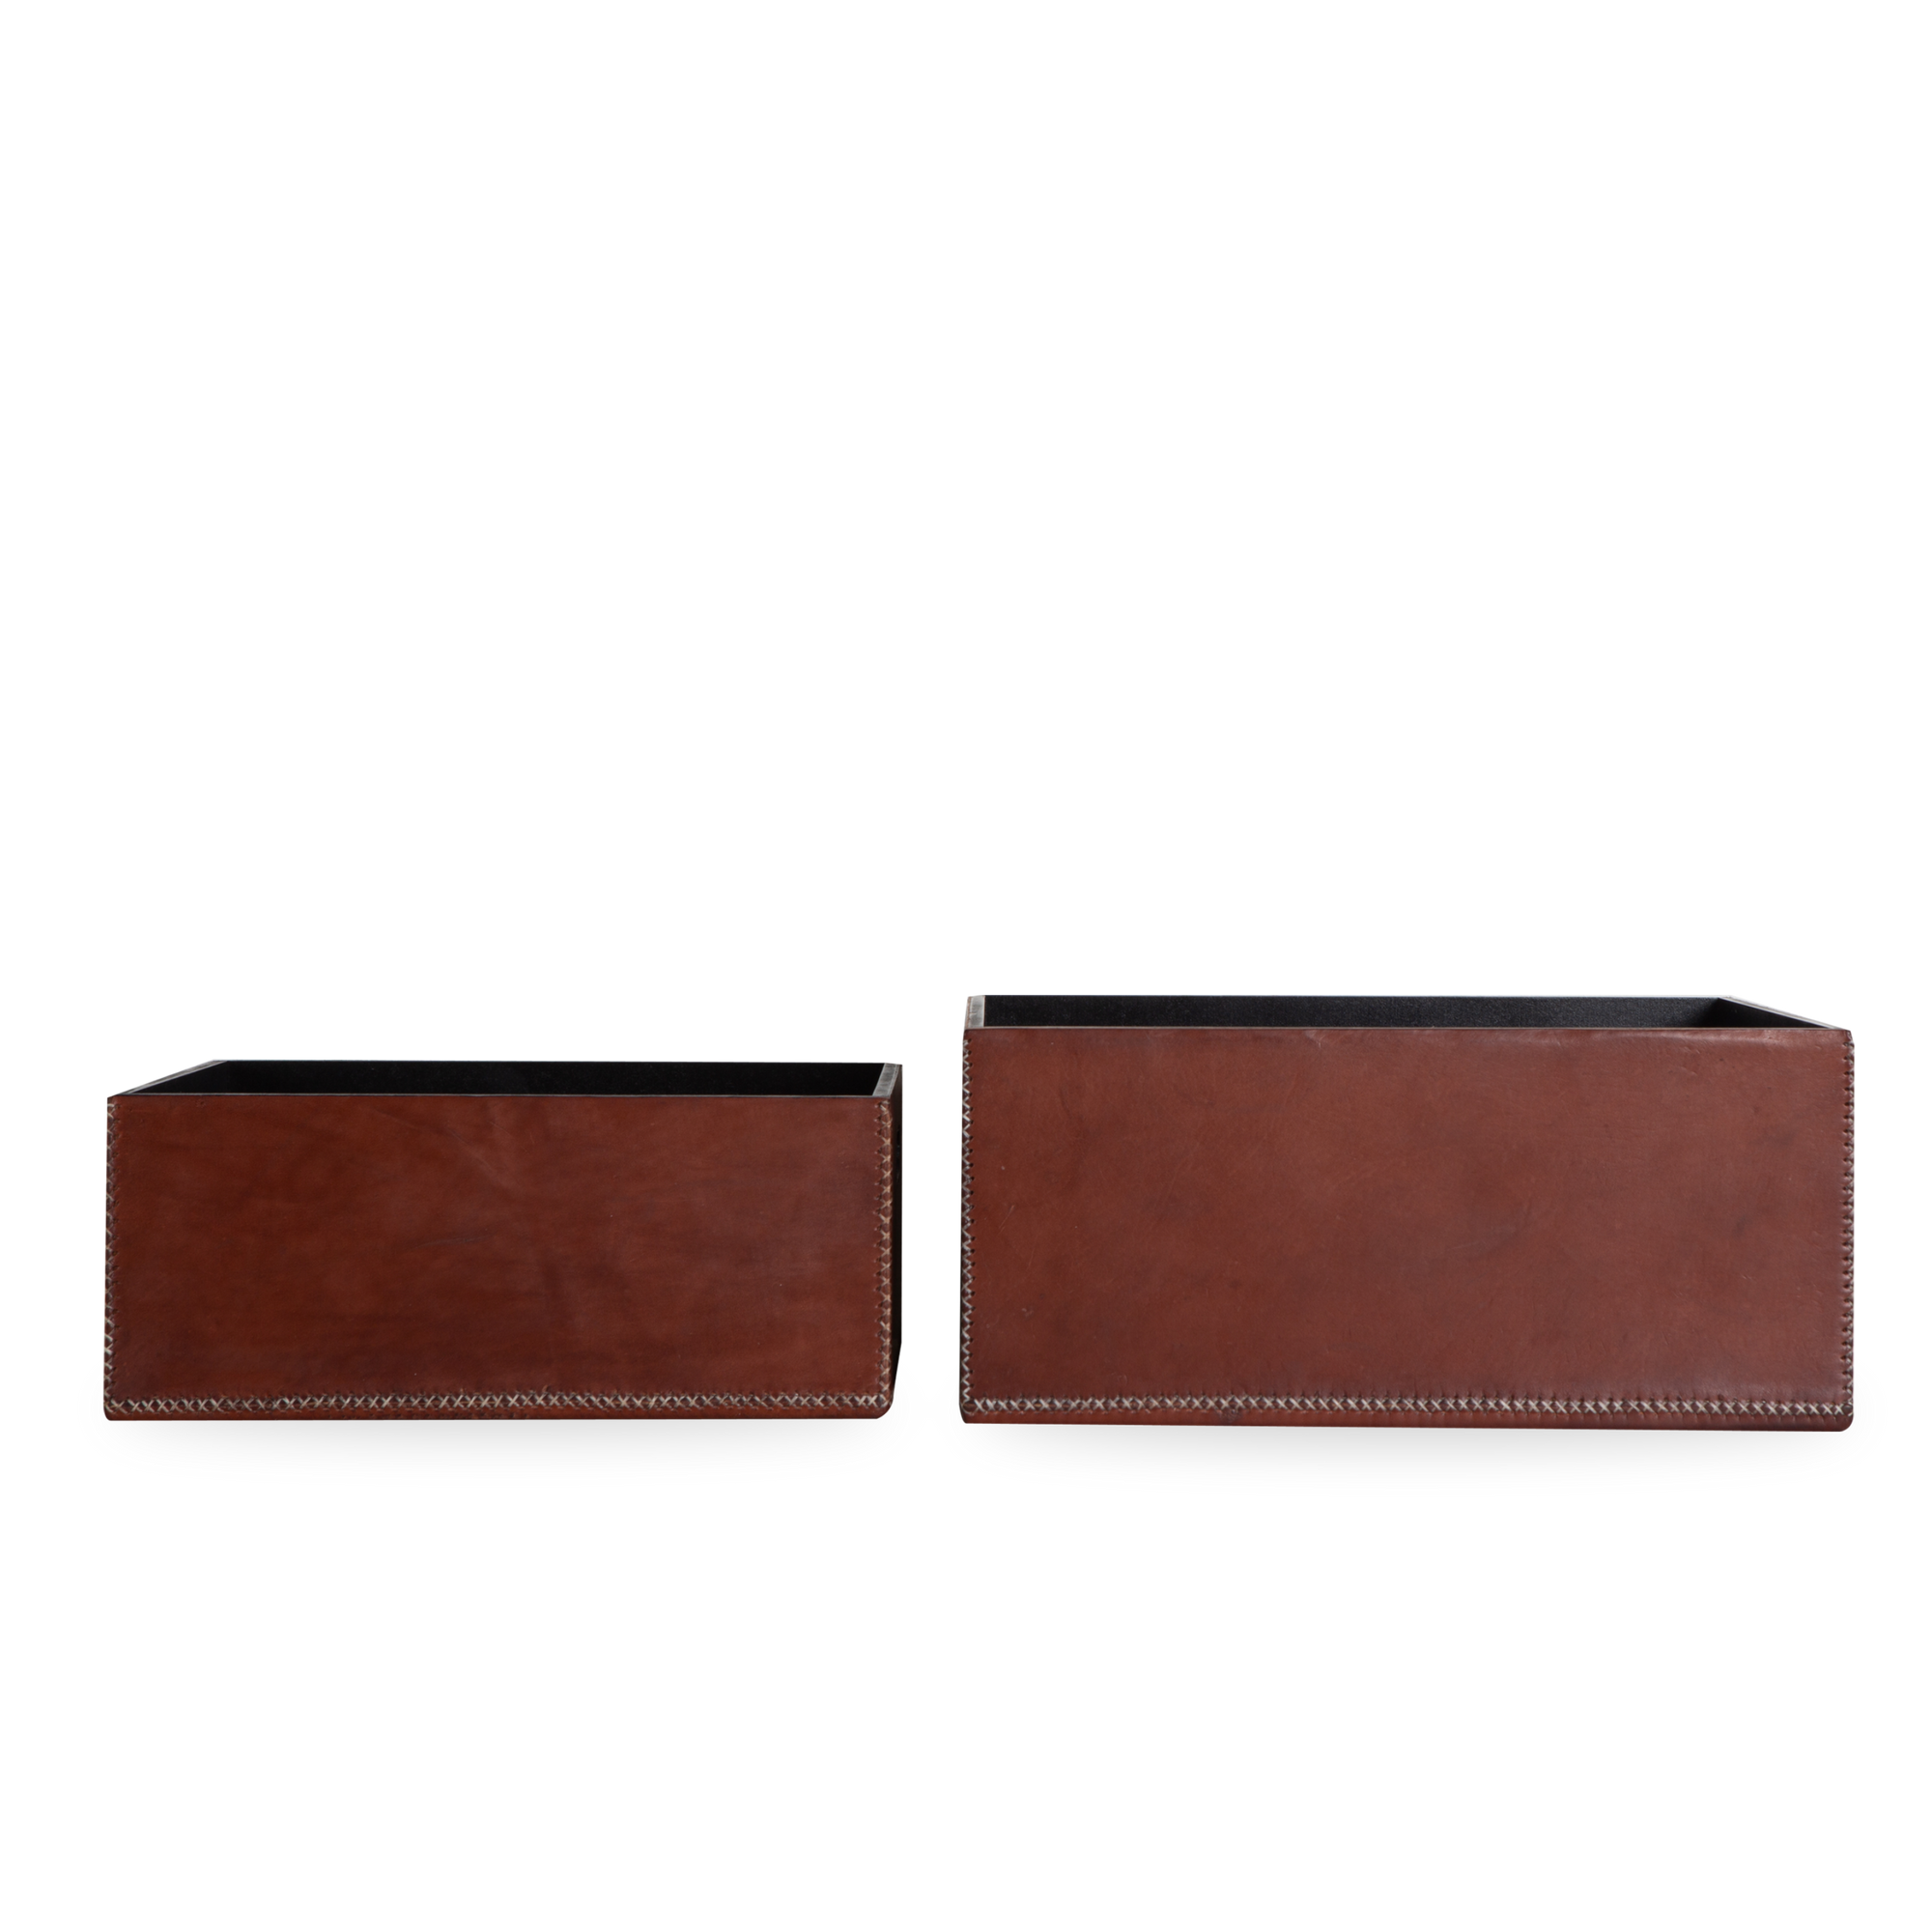 Channeling a connection to local natural materials to form a line of sustainable goods, the Solid Leather Box uses premium cow leather from the Paraguayan Chaco region.